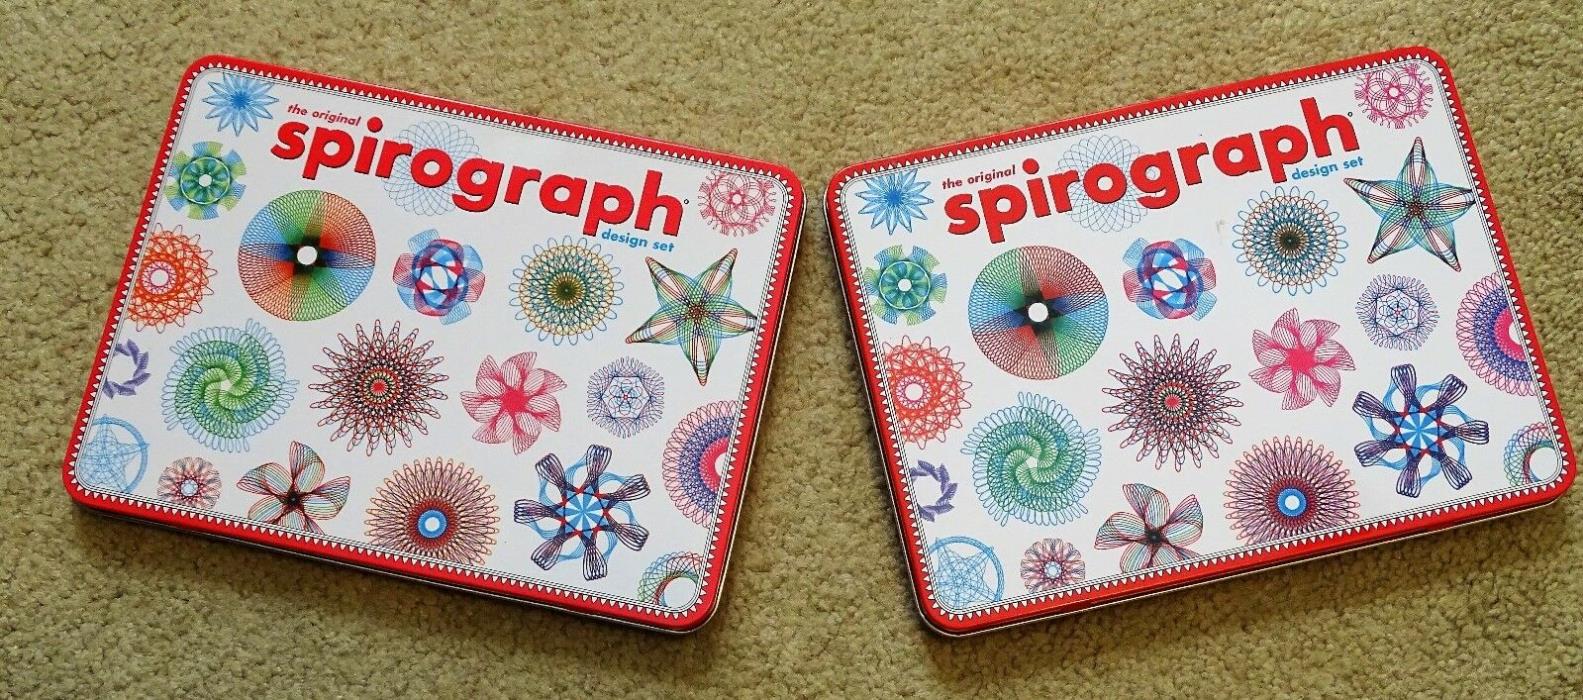 LOT OF 2 Spirograph Design Tin Sets PRE-OWNED !!